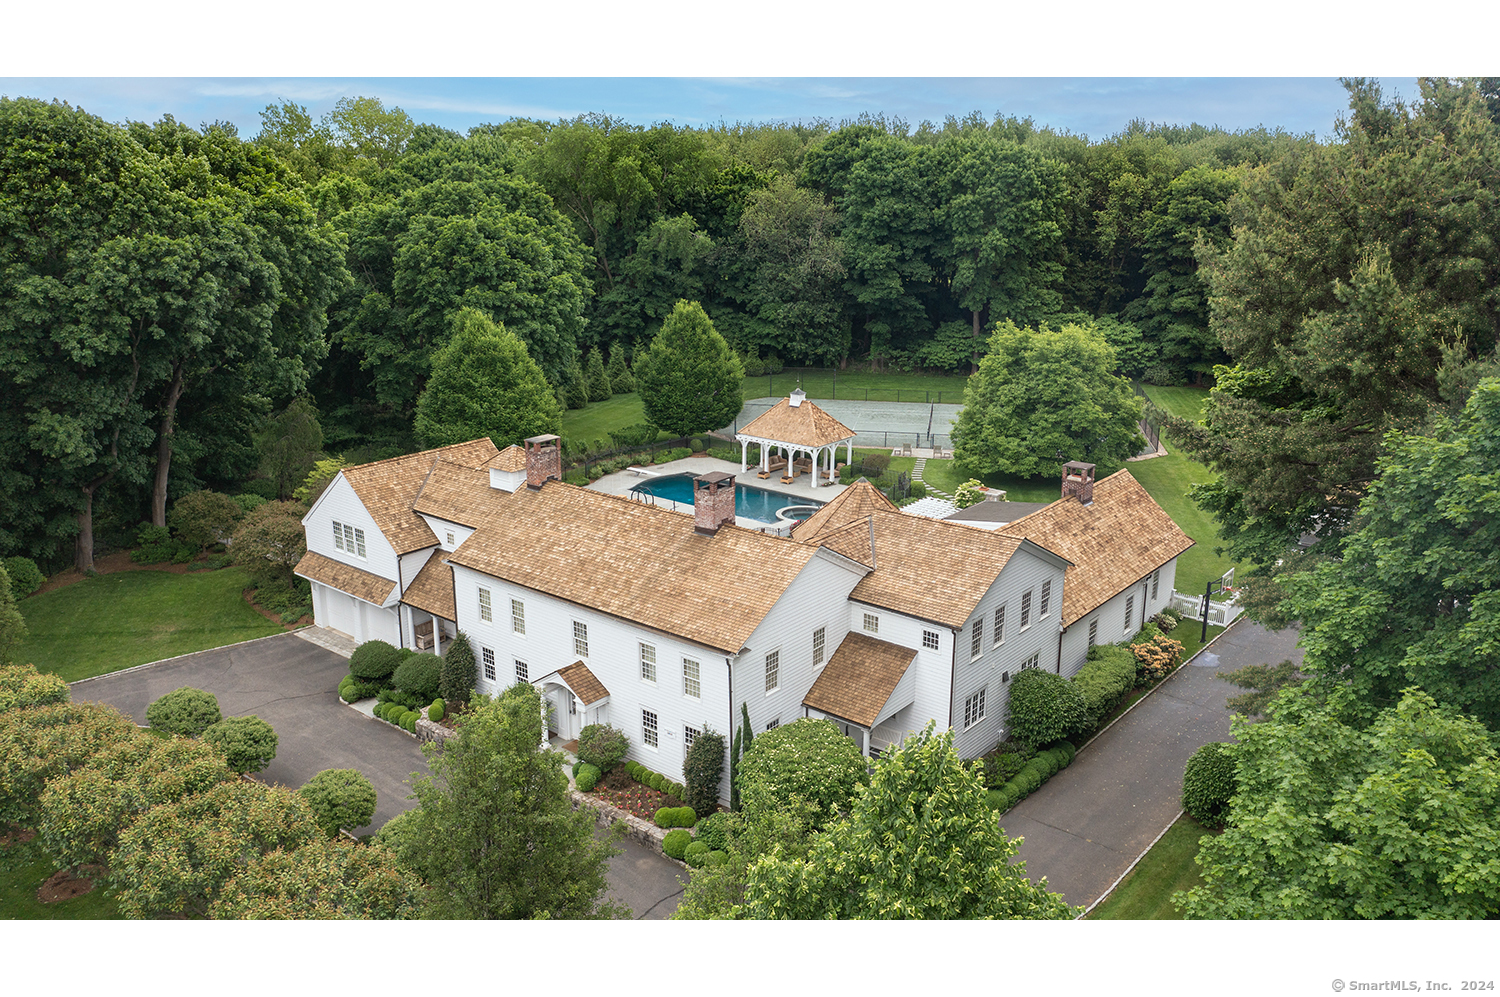 Property for Sale at 336 Greens Farms Road, Westport, Connecticut - Bedrooms: 5 
Bathrooms: 6 
Rooms: 15  - $6,000,000